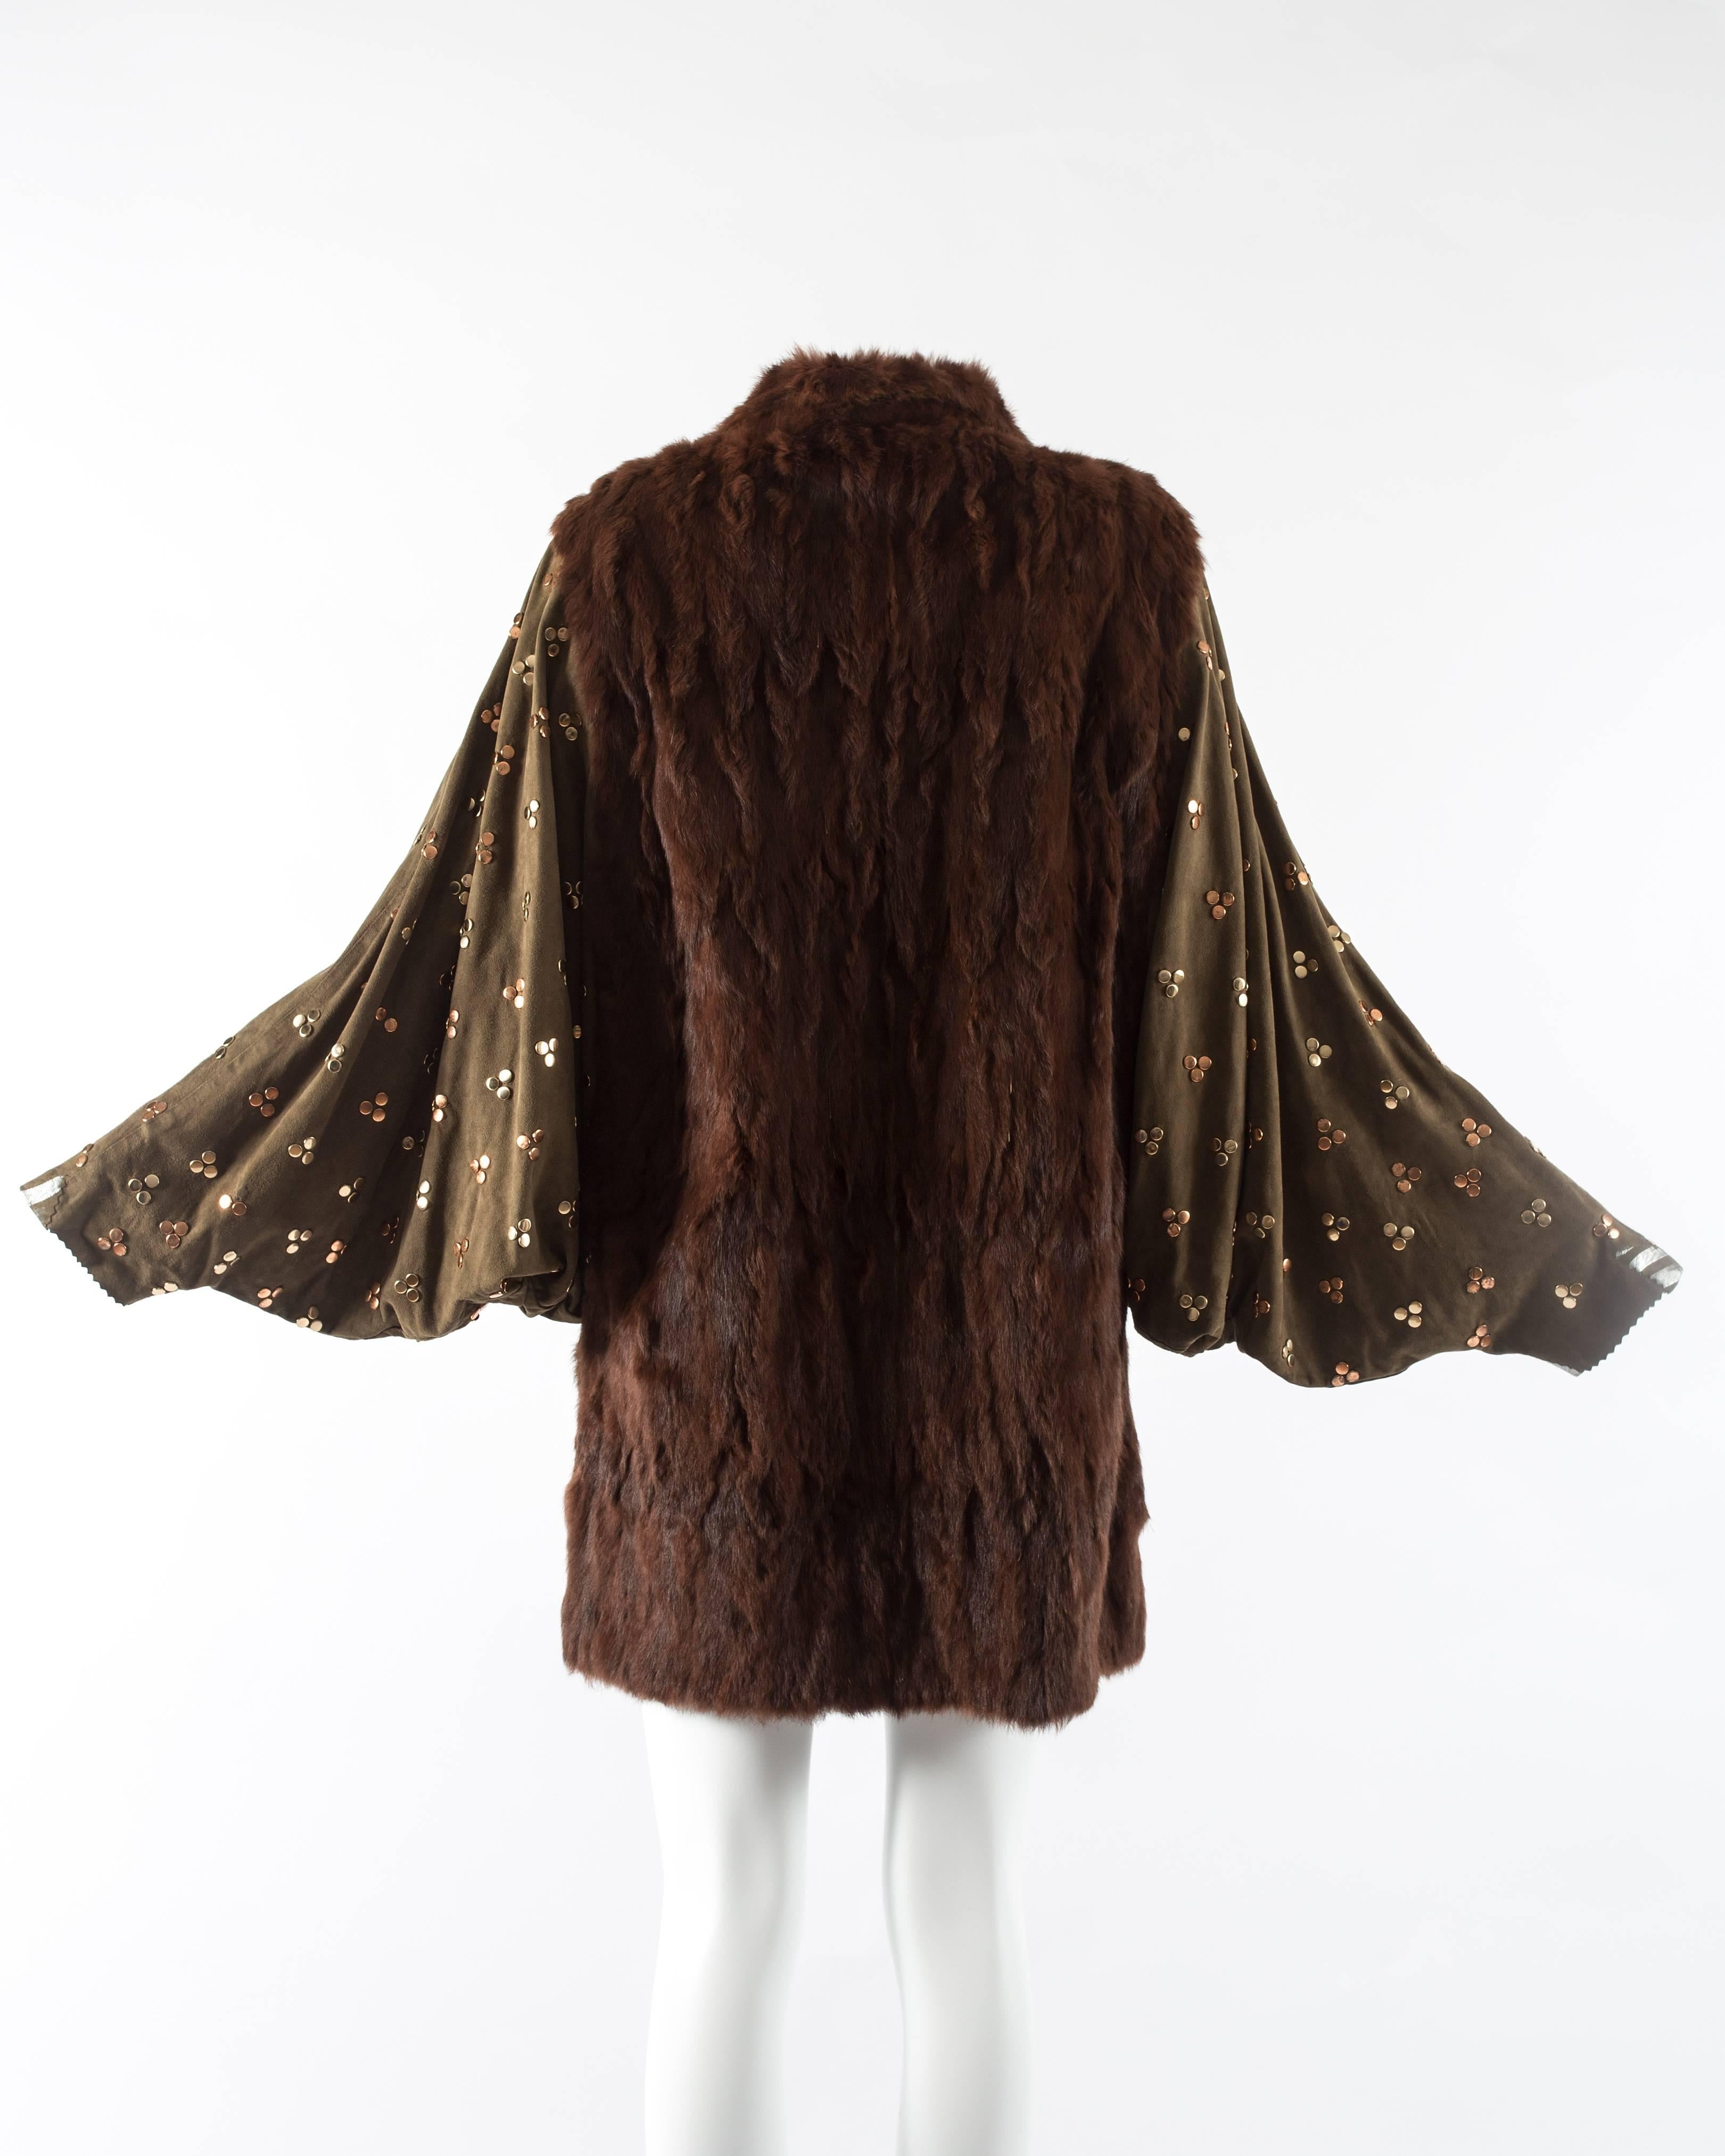 Chloe mink fur coat with studded suede batwing sleeves, circa 1980s. Open design with no closures, metallic silver paint on the cuffs and inside, and slits on the side. 